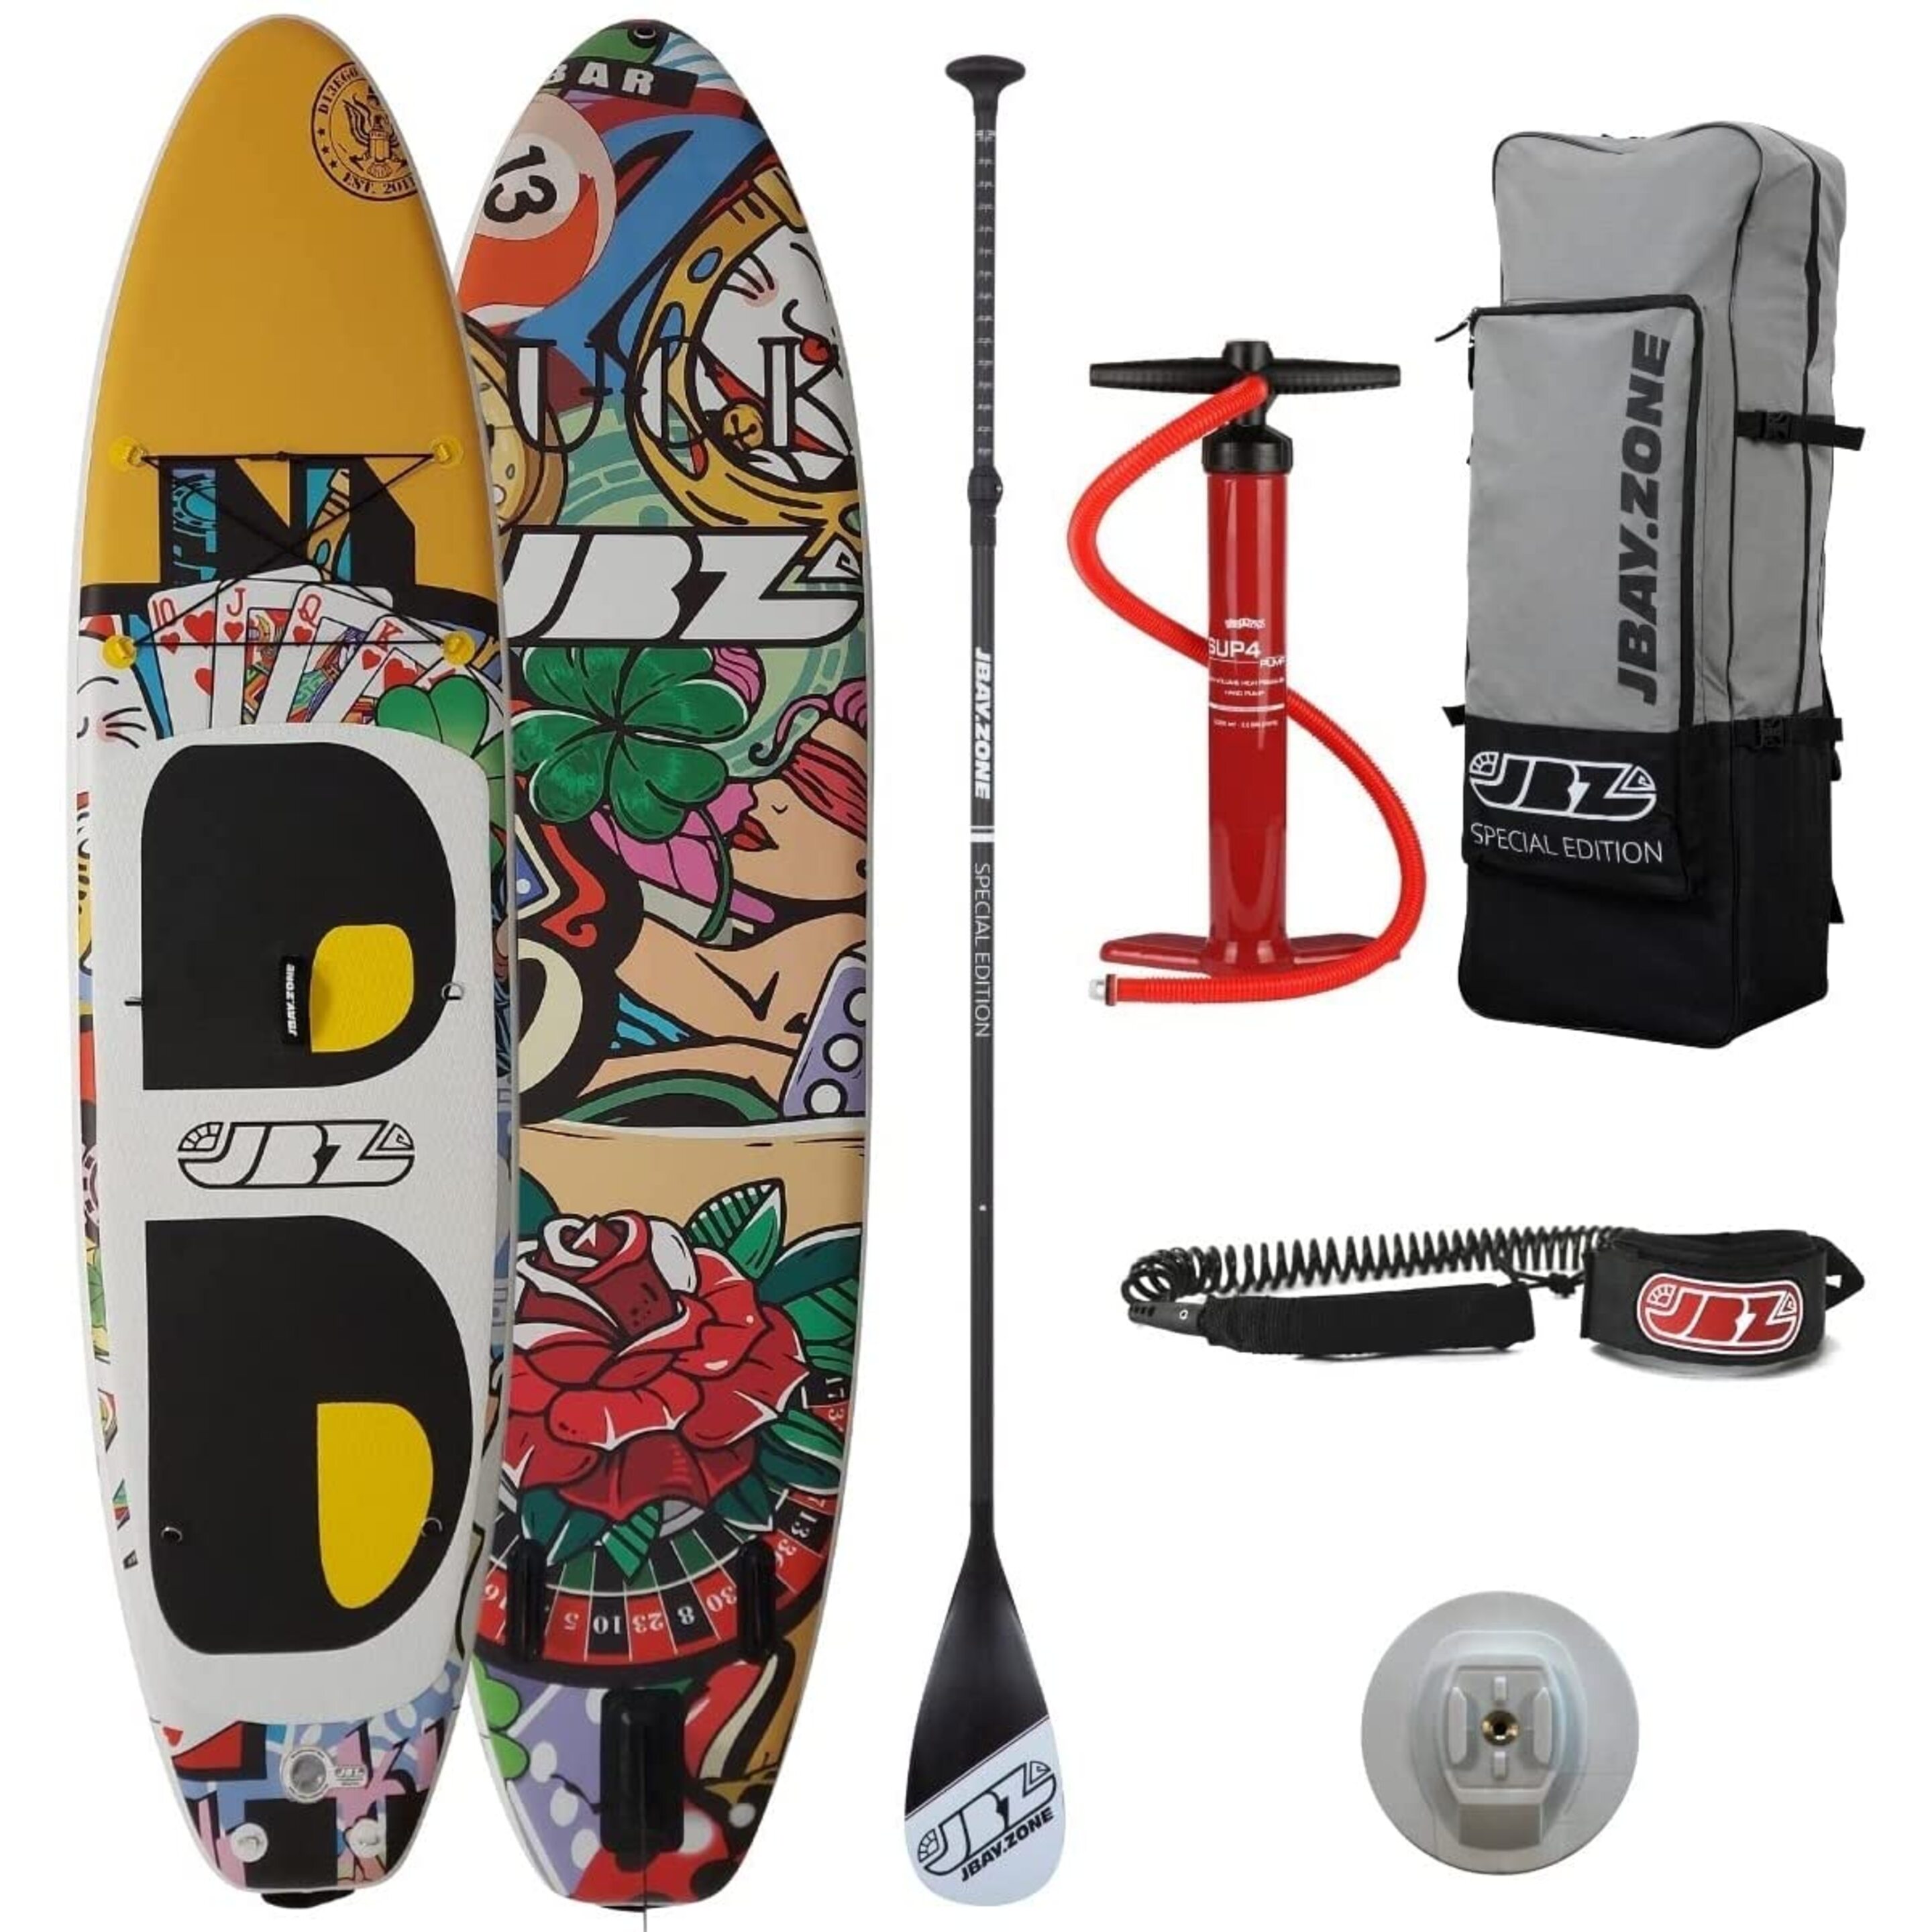 Tabla De Stand Up Paddle Surf Sup Hinchable Jbay.zone D13ego Luck Edition - amarillo-negro - 